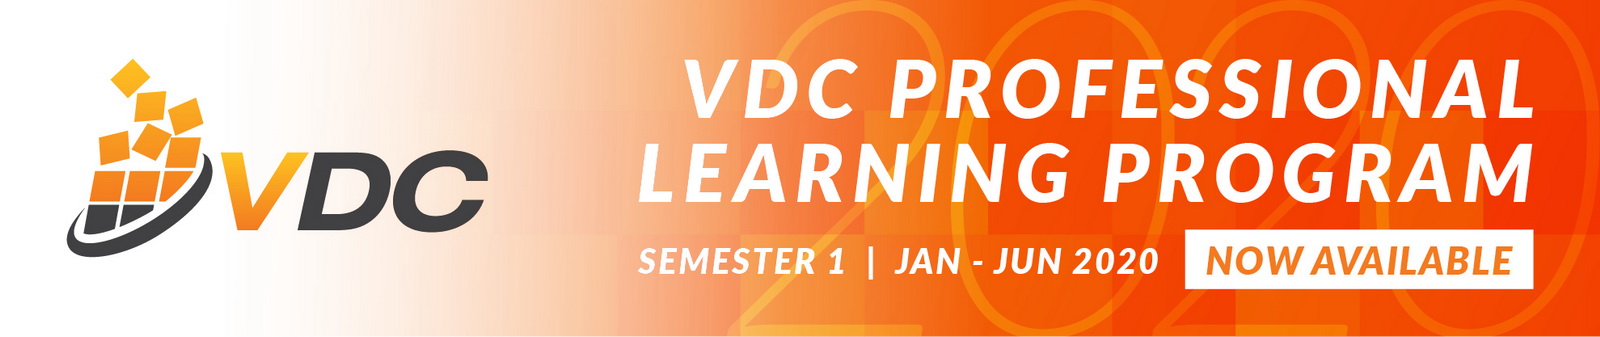 Article 1 2020 VDC Professional Learning Program Released